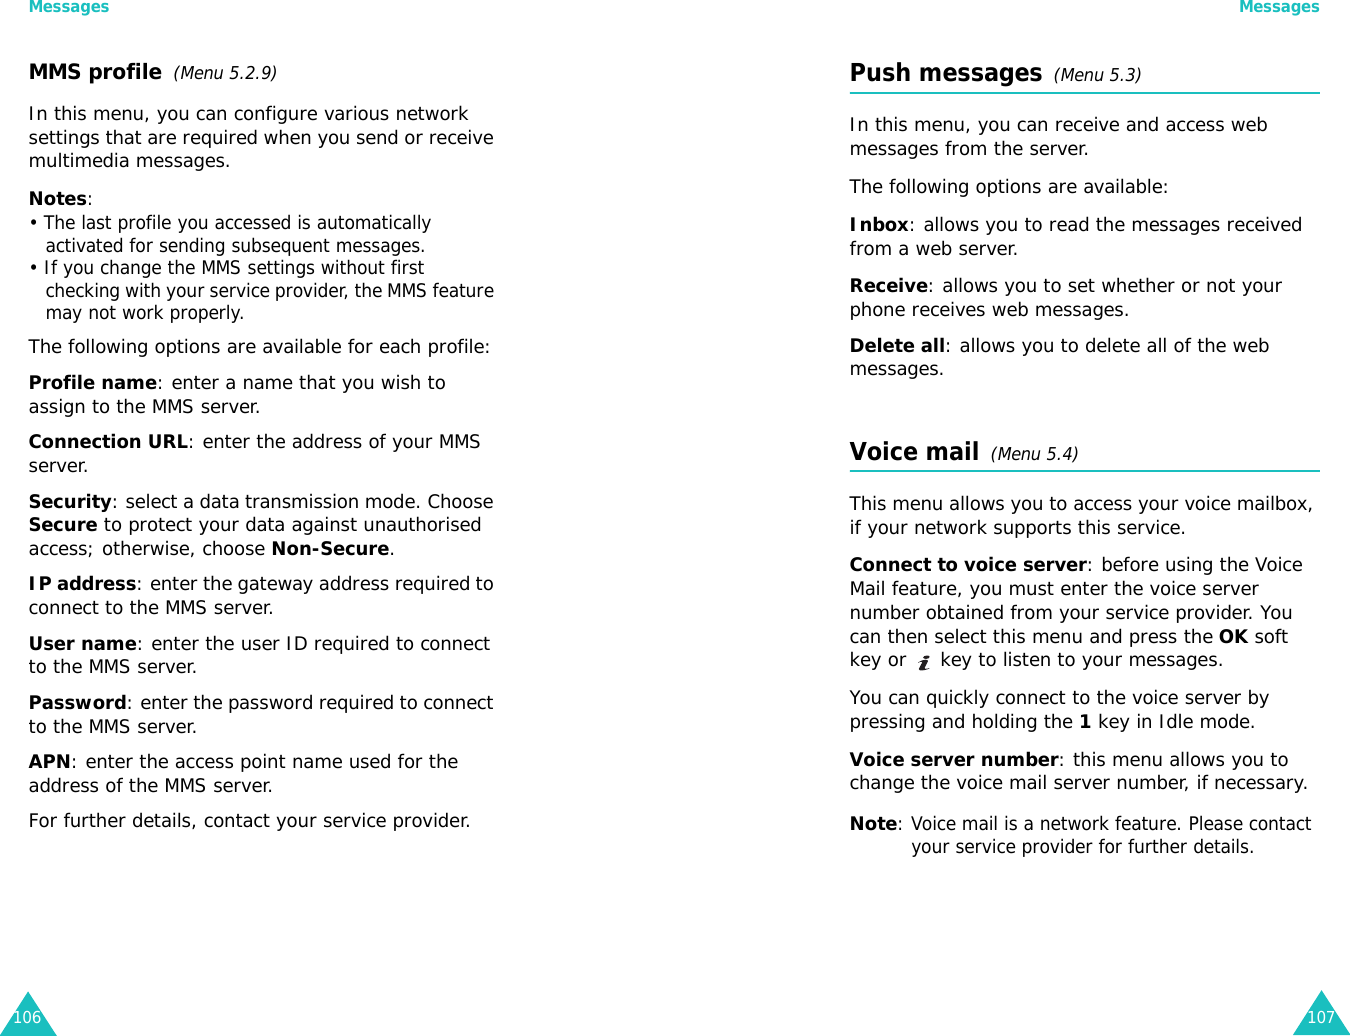 Messages106MMS profile  (Menu 5.2.9)In this menu, you can configure various network settings that are required when you send or receive multimedia messages.Notes:• The last profile you accessed is automatically activated for sending subsequent messages.• If you change the MMS settings without first checking with your service provider, the MMS feature may not work properly.The following options are available for each profile:Profile name: enter a name that you wish to assign to the MMS server. Connection URL: enter the address of your MMS server.Security: select a data transmission mode. Choose Secure to protect your data against unauthorised access; otherwise, choose Non-Secure.IP address: enter the gateway address required to connect to the MMS server.User name: enter the user ID required to connect to the MMS server.Password: enter the password required to connect to the MMS server.APN: enter the access point name used for the address of the MMS server.For further details, contact your service provider.Messages107Push messages  (Menu 5.3)In this menu, you can receive and access web messages from the server.The following options are available:Inbox: allows you to read the messages received from a web server.Receive: allows you to set whether or not your phone receives web messages.Delete all: allows you to delete all of the web messages.Voice mail  (Menu 5.4)This menu allows you to access your voice mailbox, if your network supports this service. Connect to voice server: before using the Voice Mail feature, you must enter the voice server number obtained from your service provider. You can then select this menu and press the OK soft key or   key to listen to your messages. You can quickly connect to the voice server by pressing and holding the 1 key in Idle mode.Voice server number: this menu allows you to change the voice mail server number, if necessary.Note: Voice mail is a network feature. Please contact your service provider for further details.